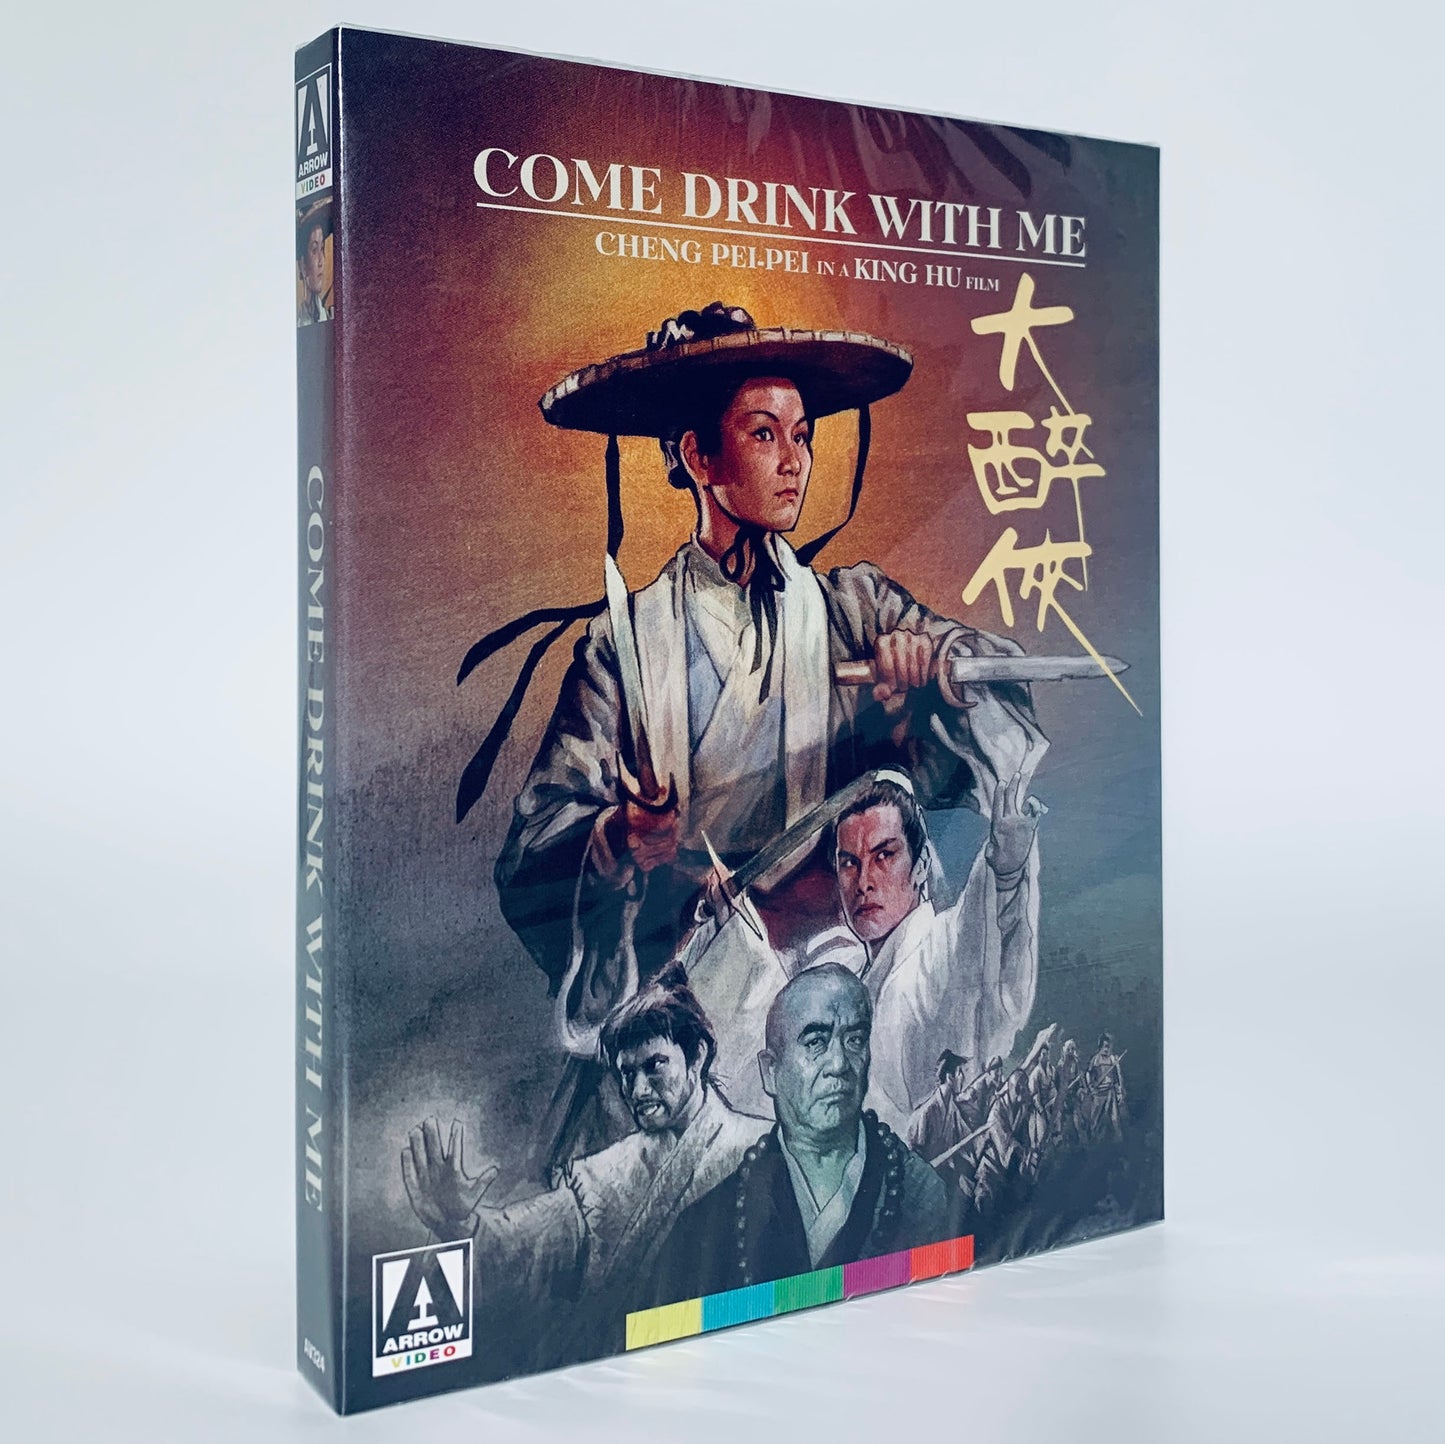 Come Drink with Me Limited Edition Blu-ray Arrow Films Cheng Pei-pei King Hu Shaw Brothers